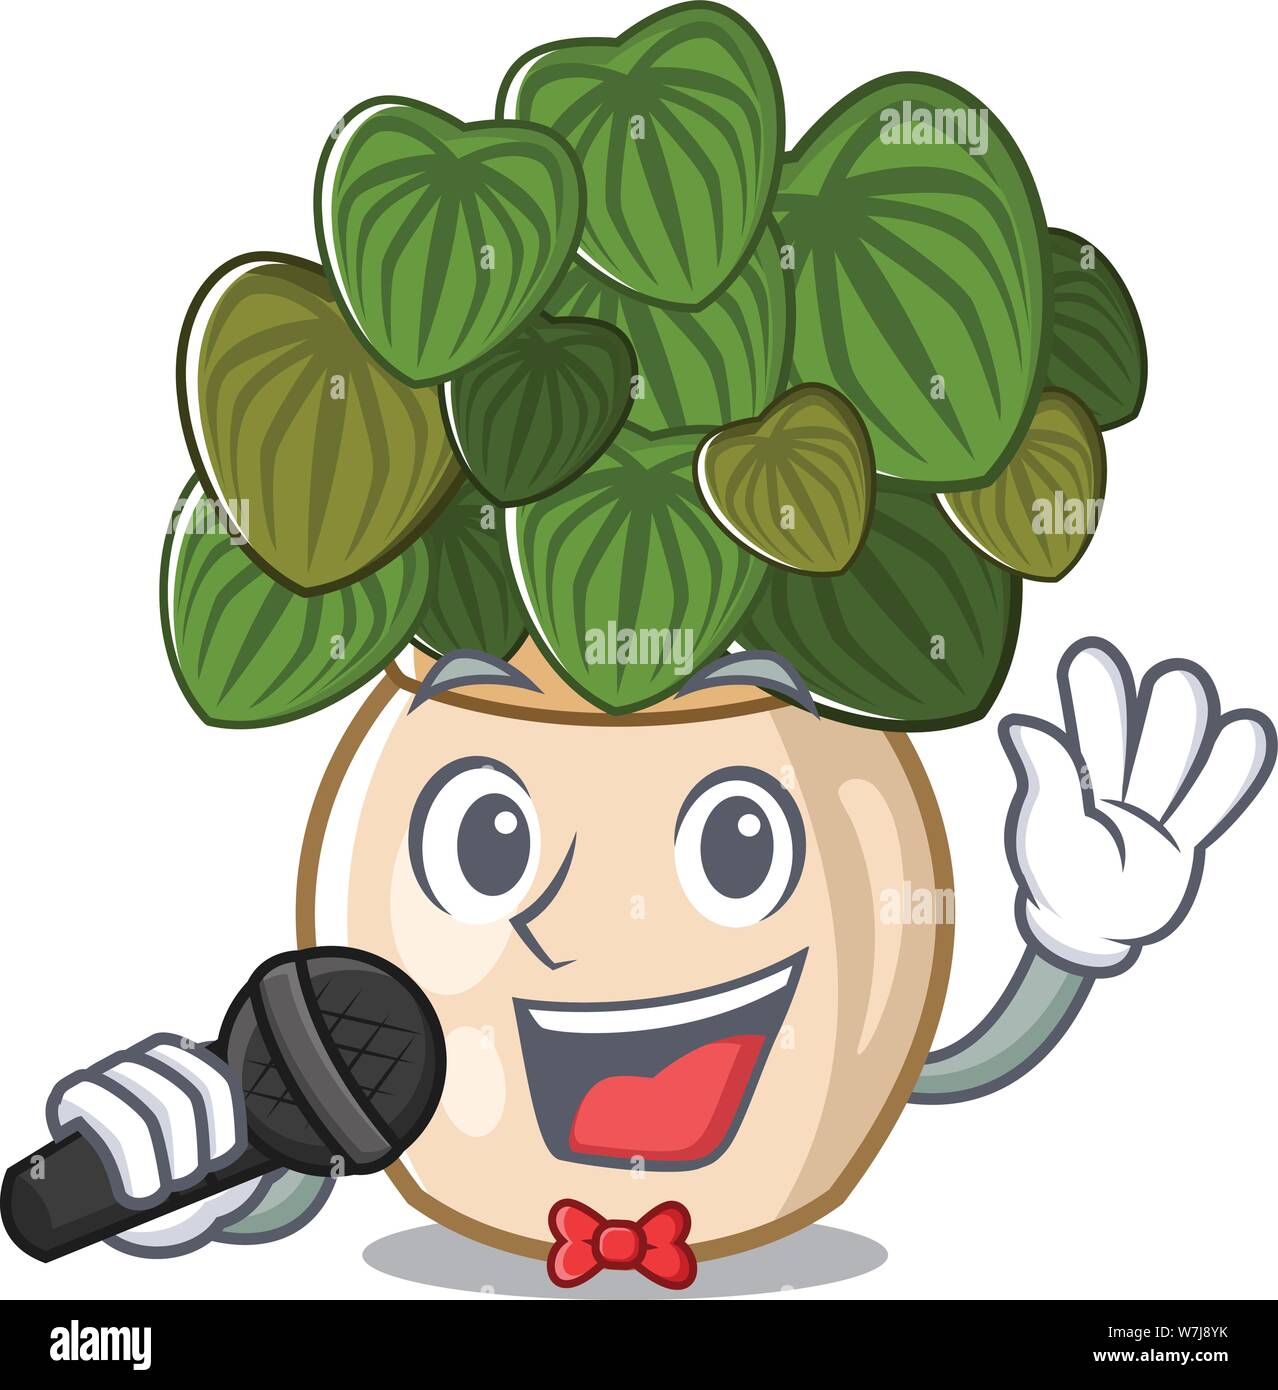 Singing peperomia spreads on the cartoon stems Stock Vector